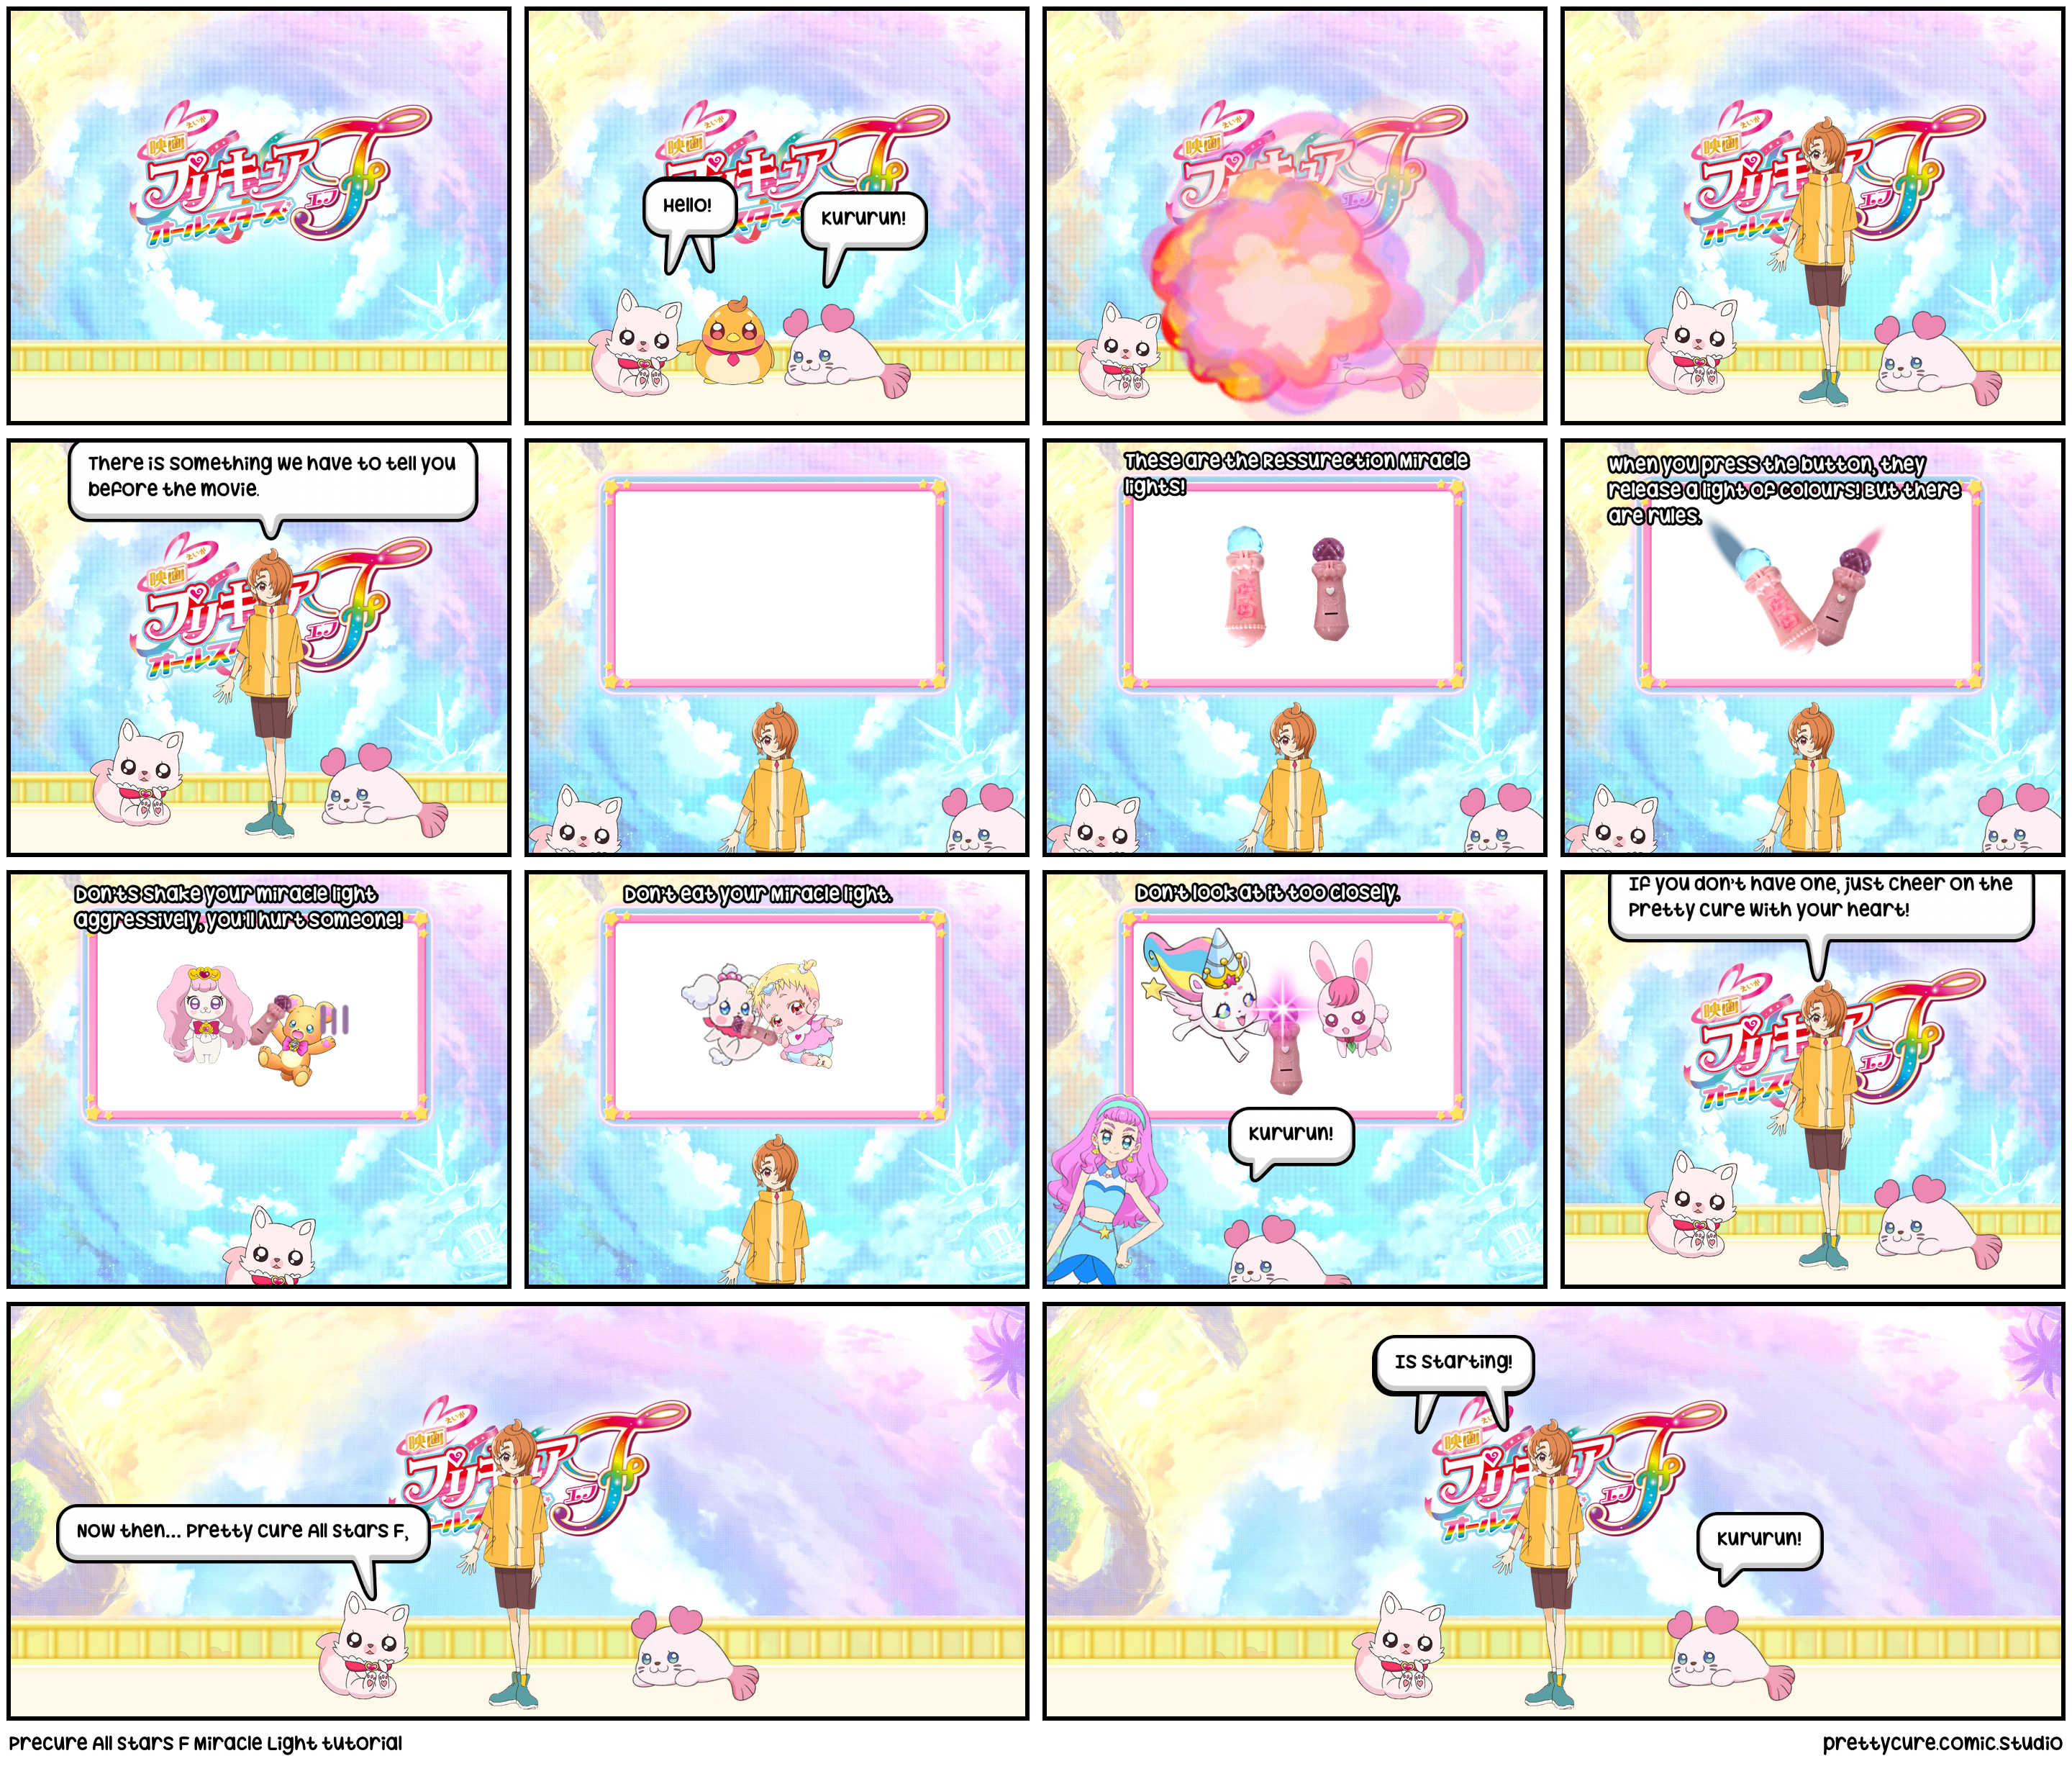 Precure All Stars F Miracle Light tutorial